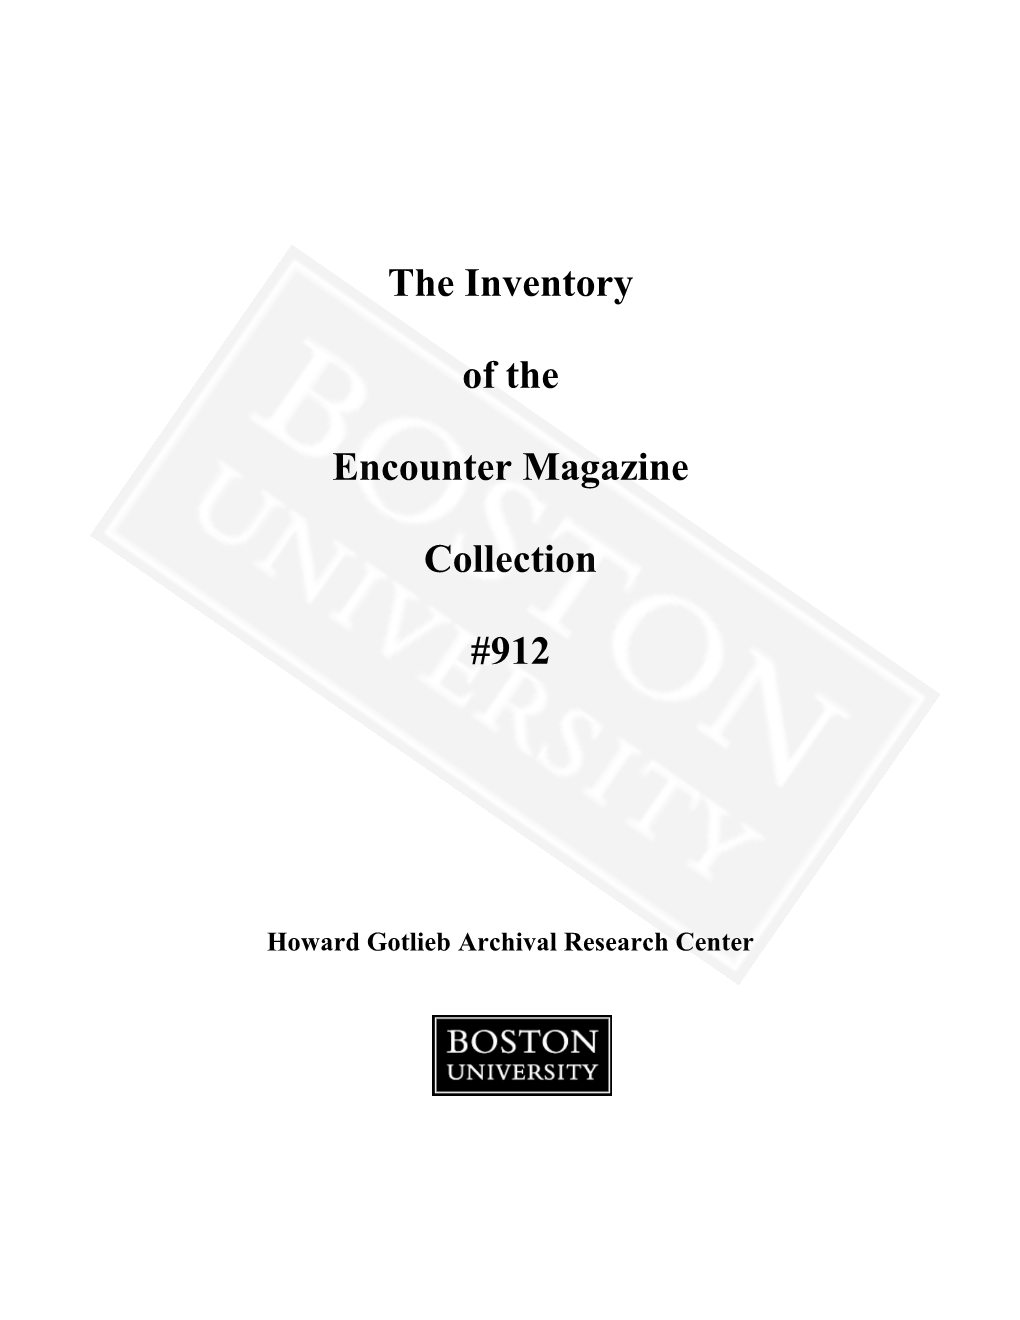 The Inventory of the Encounter Magazine Collection #912